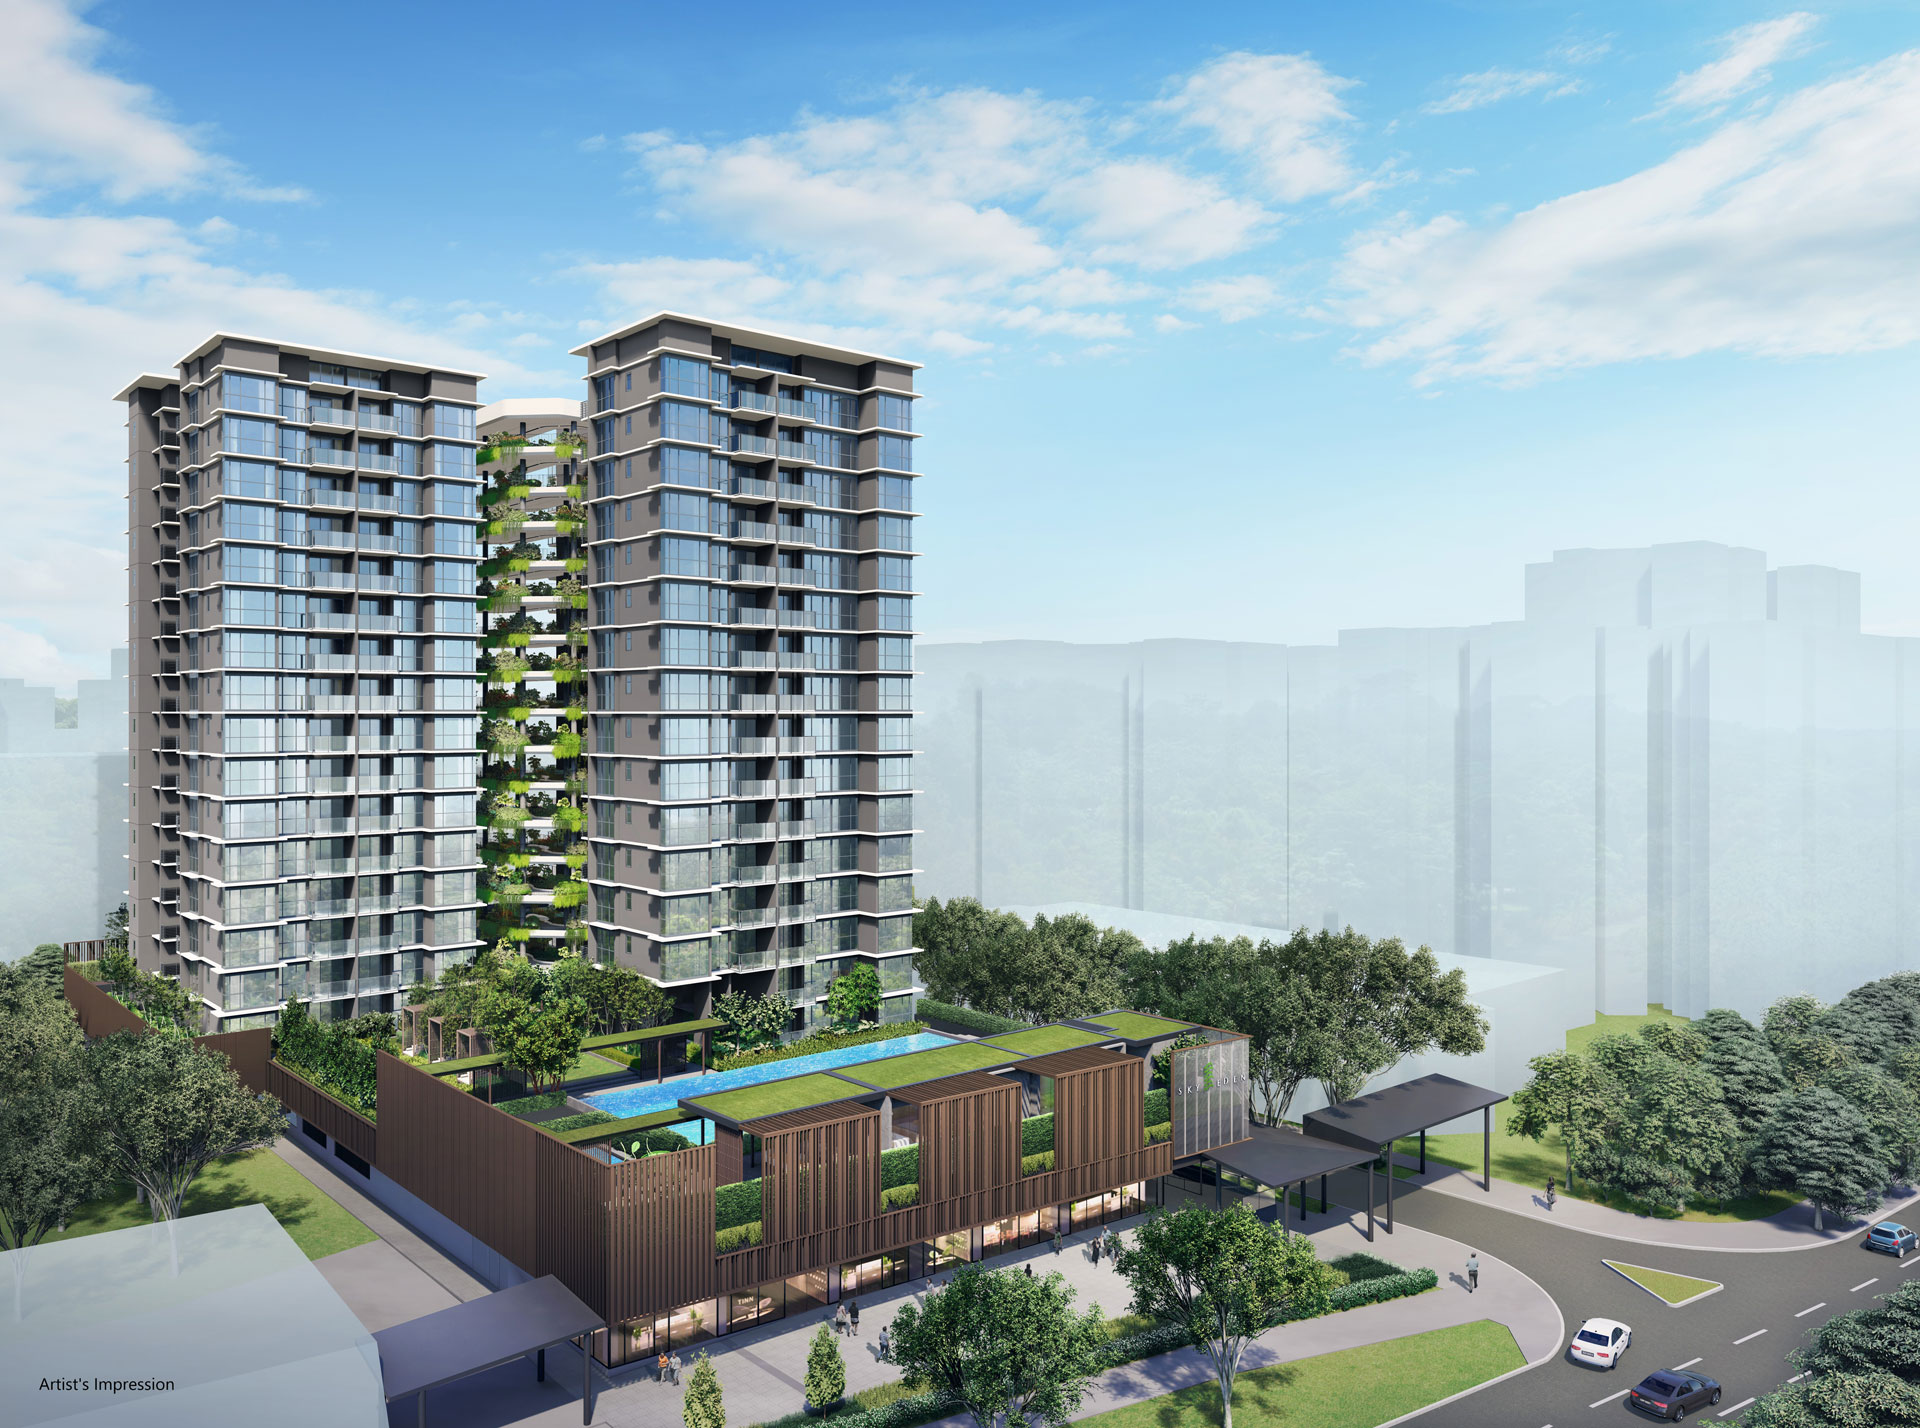 Frasers Property's H1 profit increased 52.2% to S$197.2 million thanks to residential New Launch Condos contribution